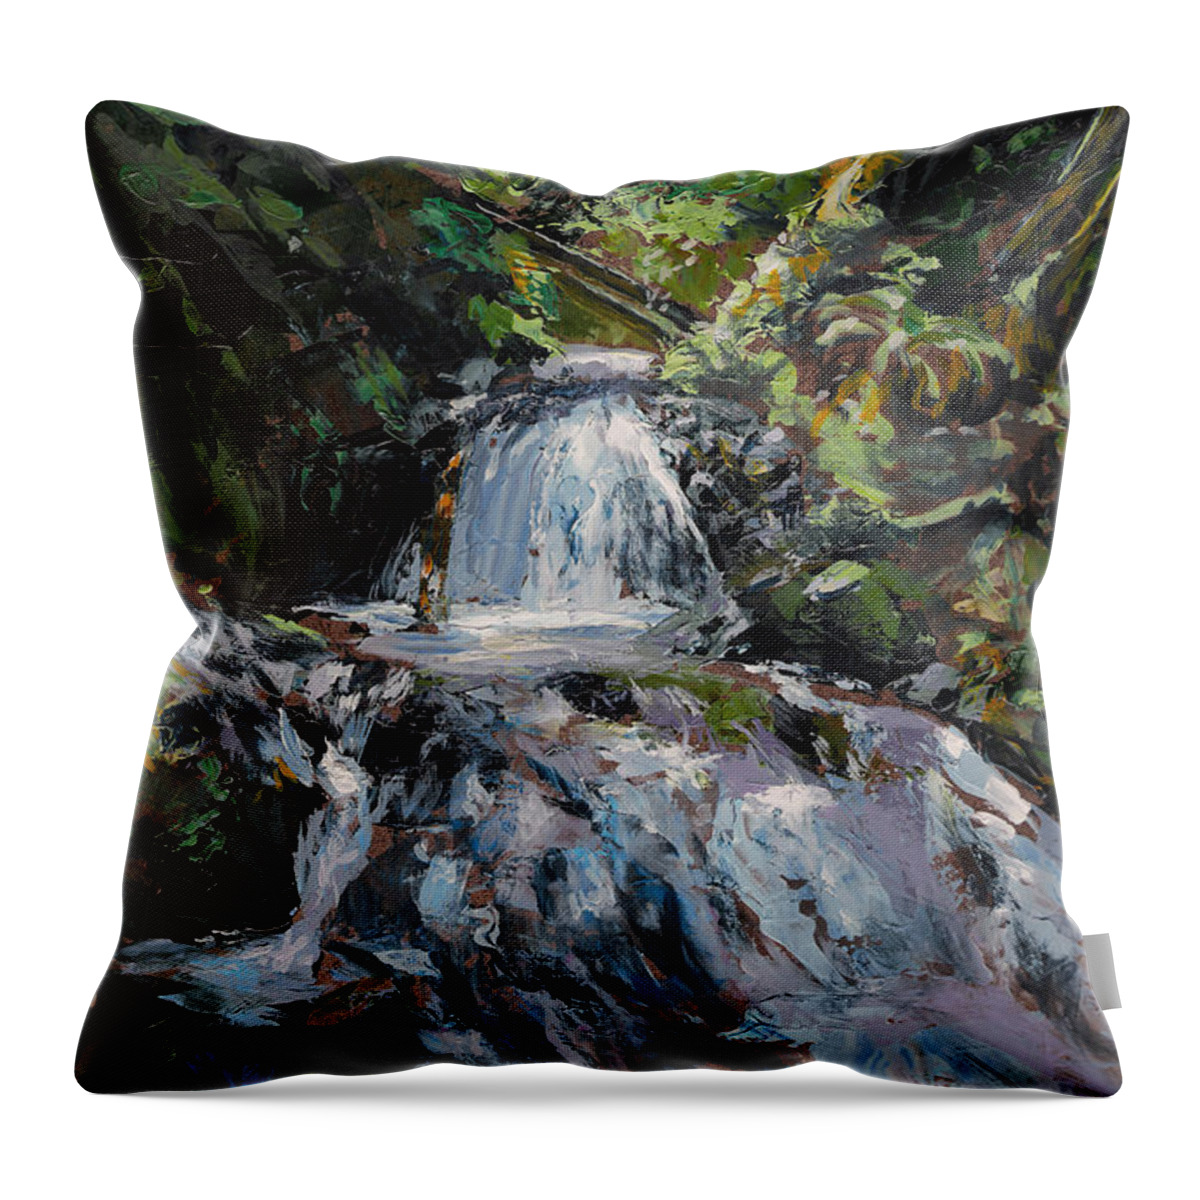 Impressionistic Throw Pillow featuring the painting Refreshed - Rainforest Waterfall Impressionistic Painting by K Whitworth